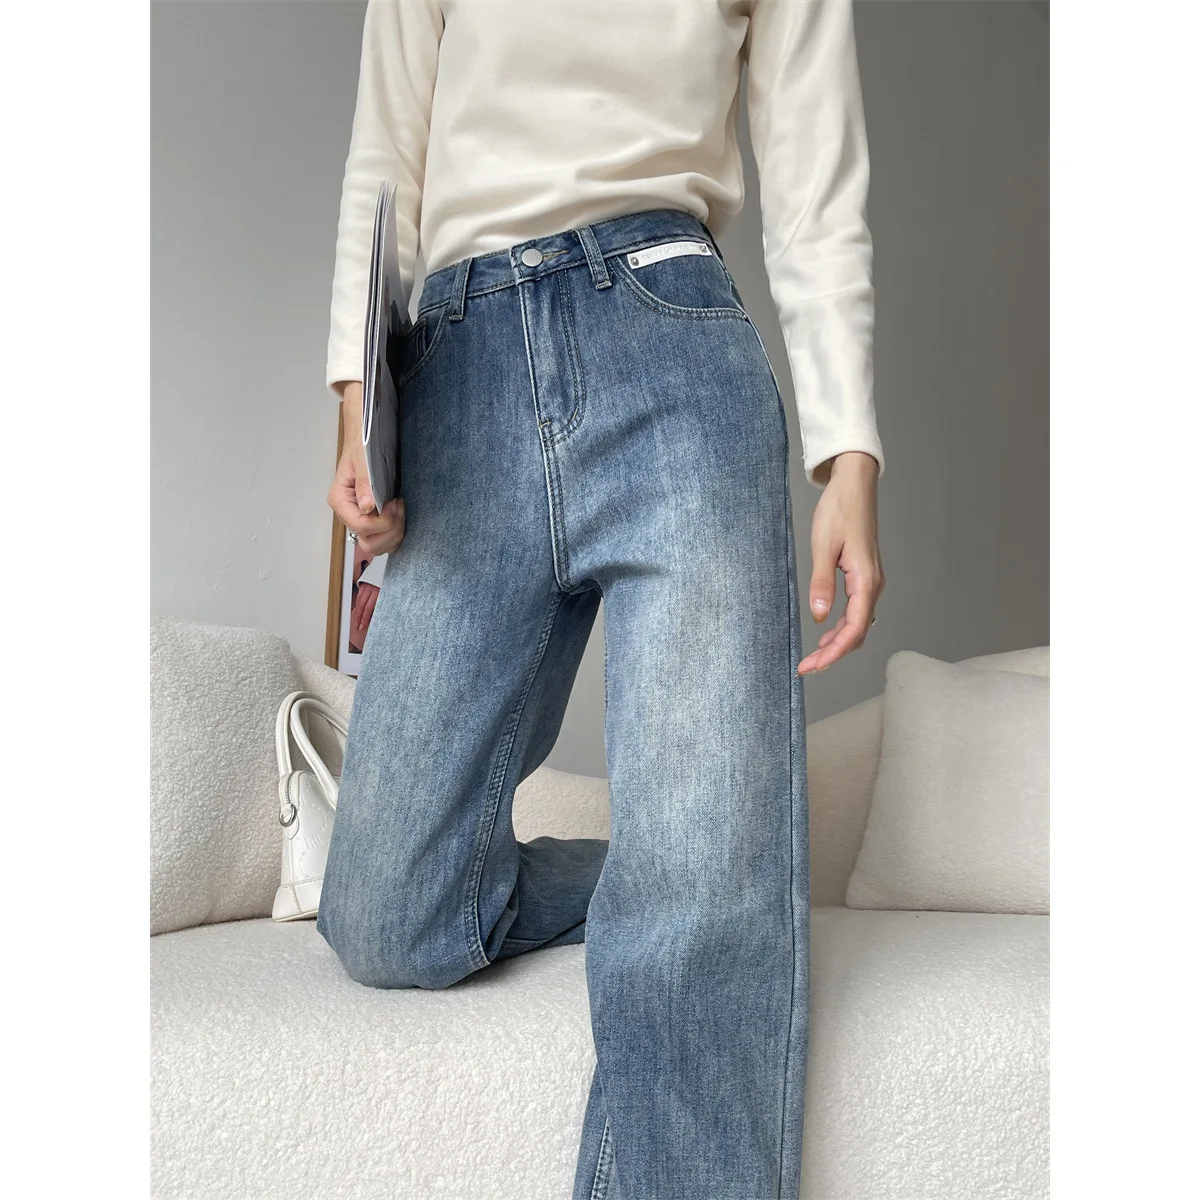 

Purchasing Crotch Covering High Waist Wide Leg Jeans for Women in Autumn, Slim and Loose, Retro Straight leg Pants